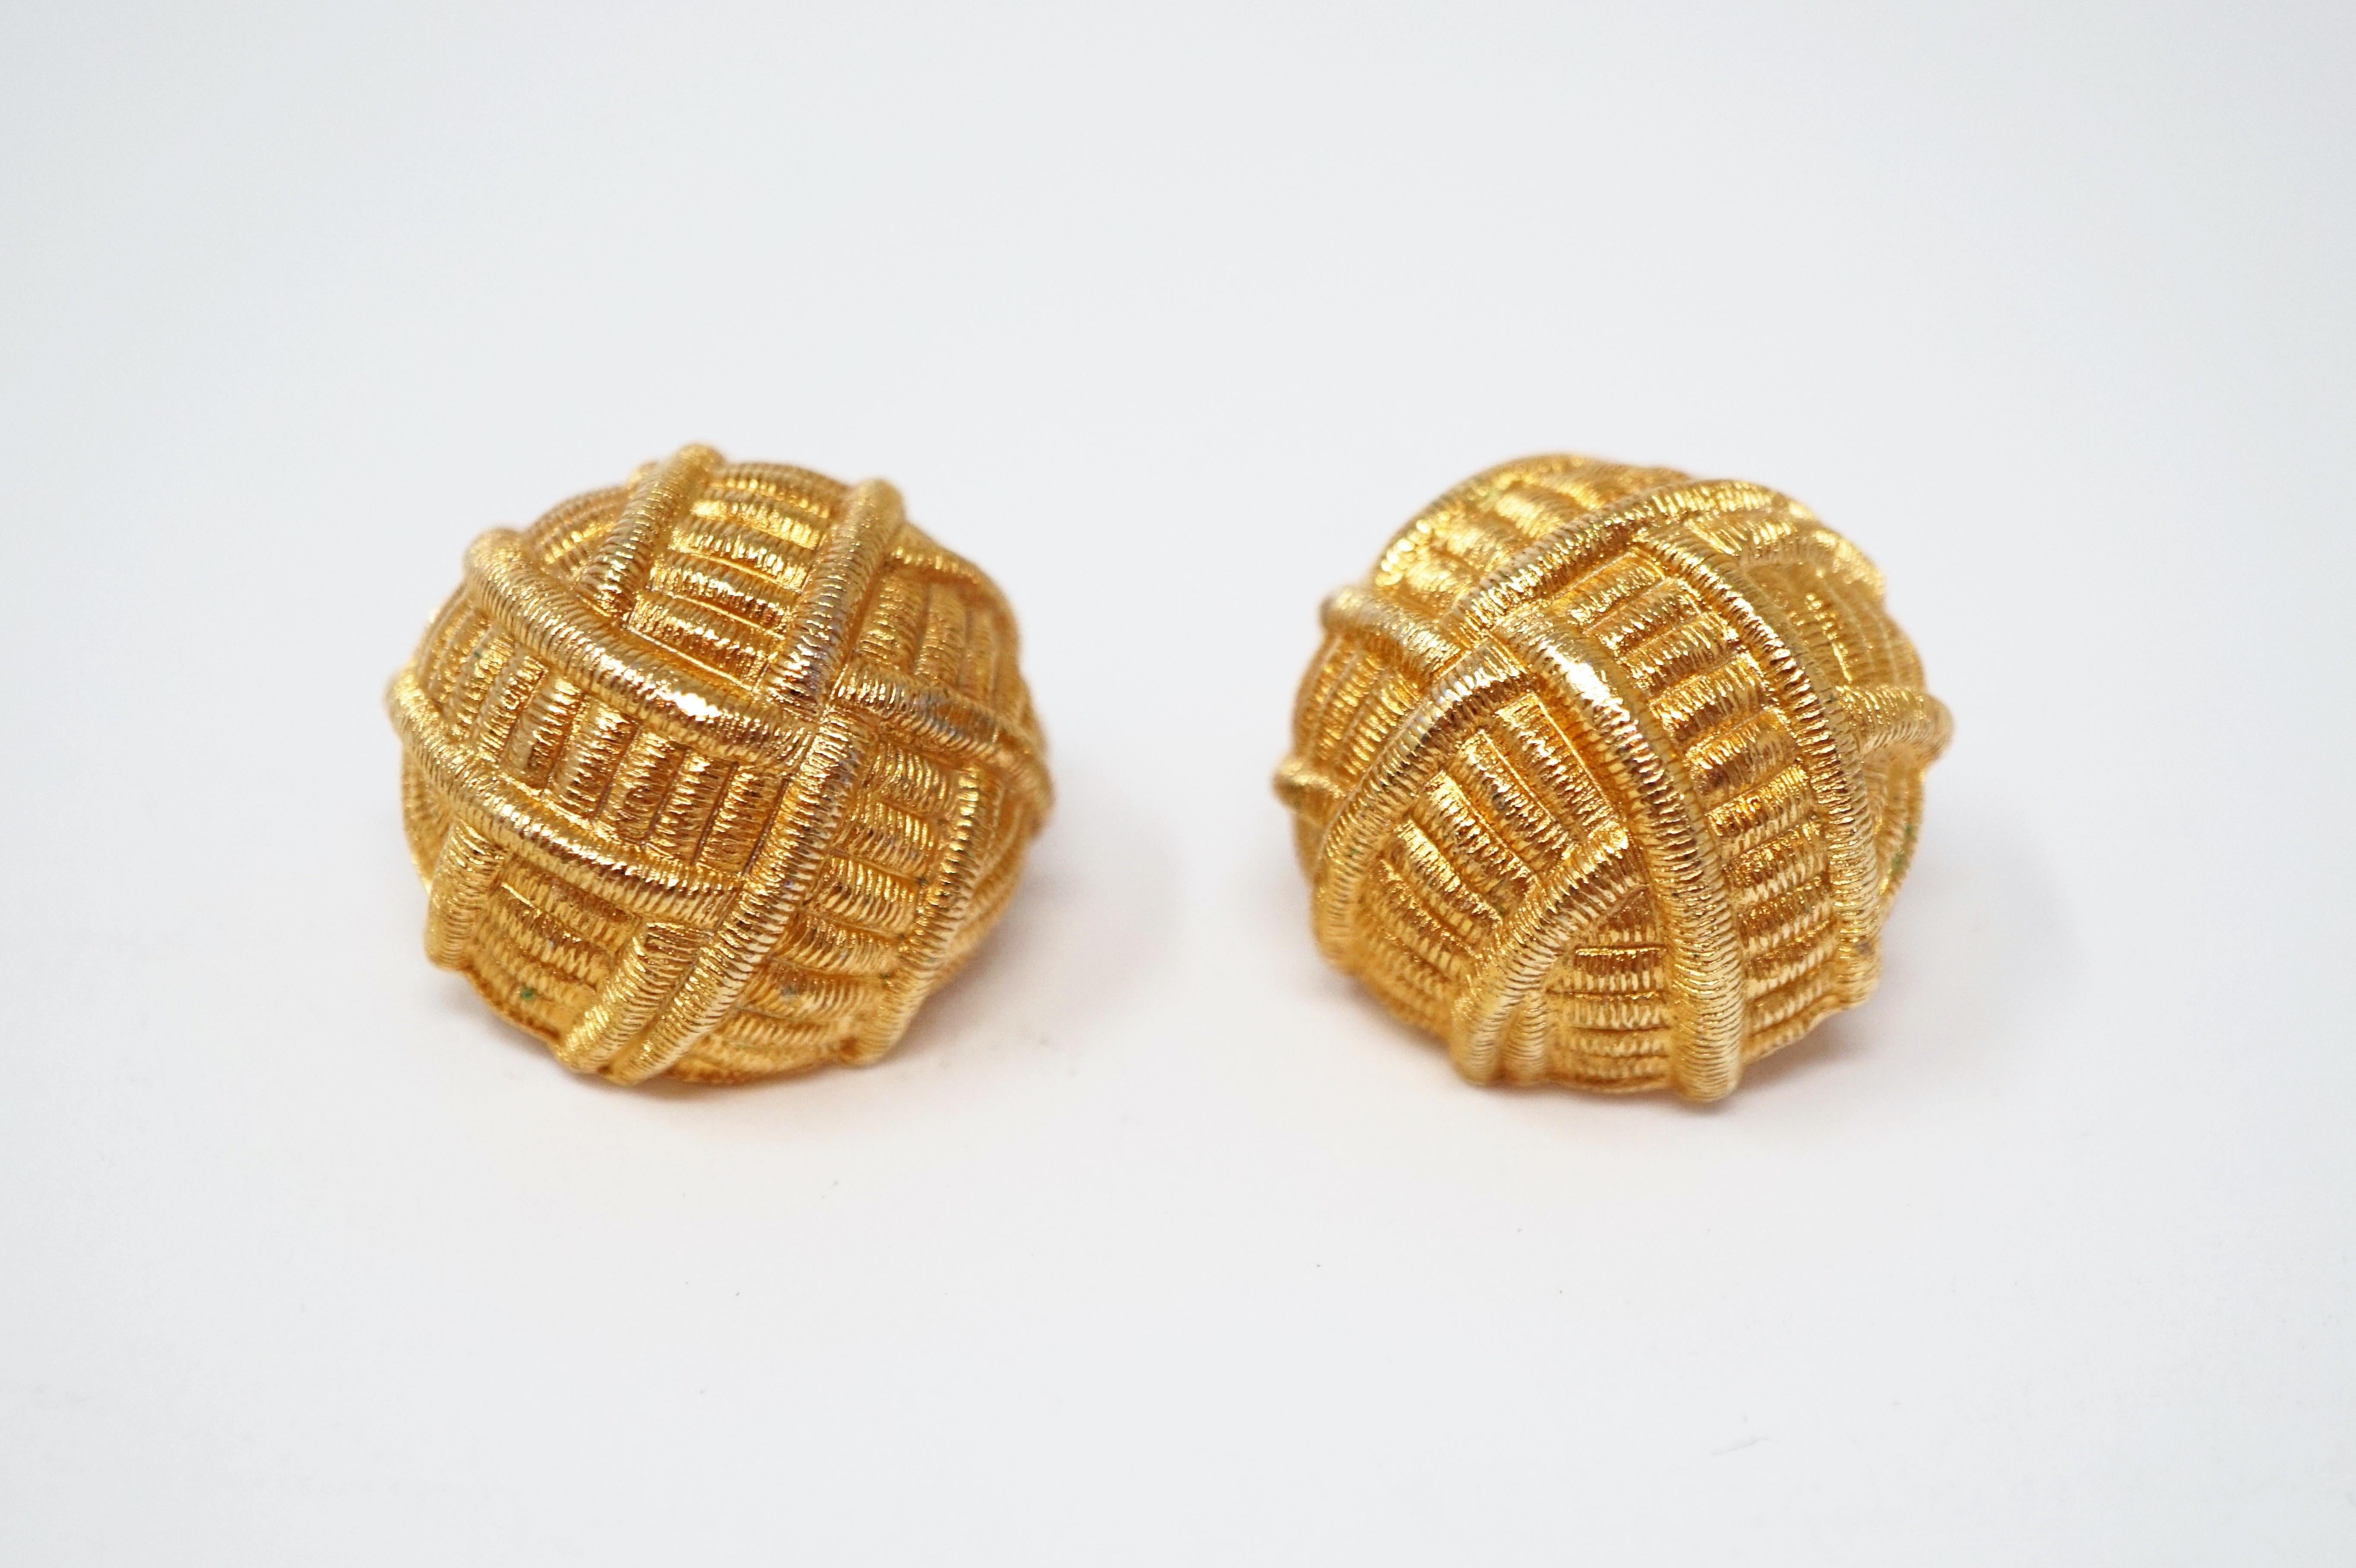 These gorgeous gilded clip-on dome statement earrings by Givenchy make a bold statement with a beautiful shiny gold luster. An excellent example of Givenchy's 80s style and a wonderful addition to your vintage jewelry collection.

Givenchy is a